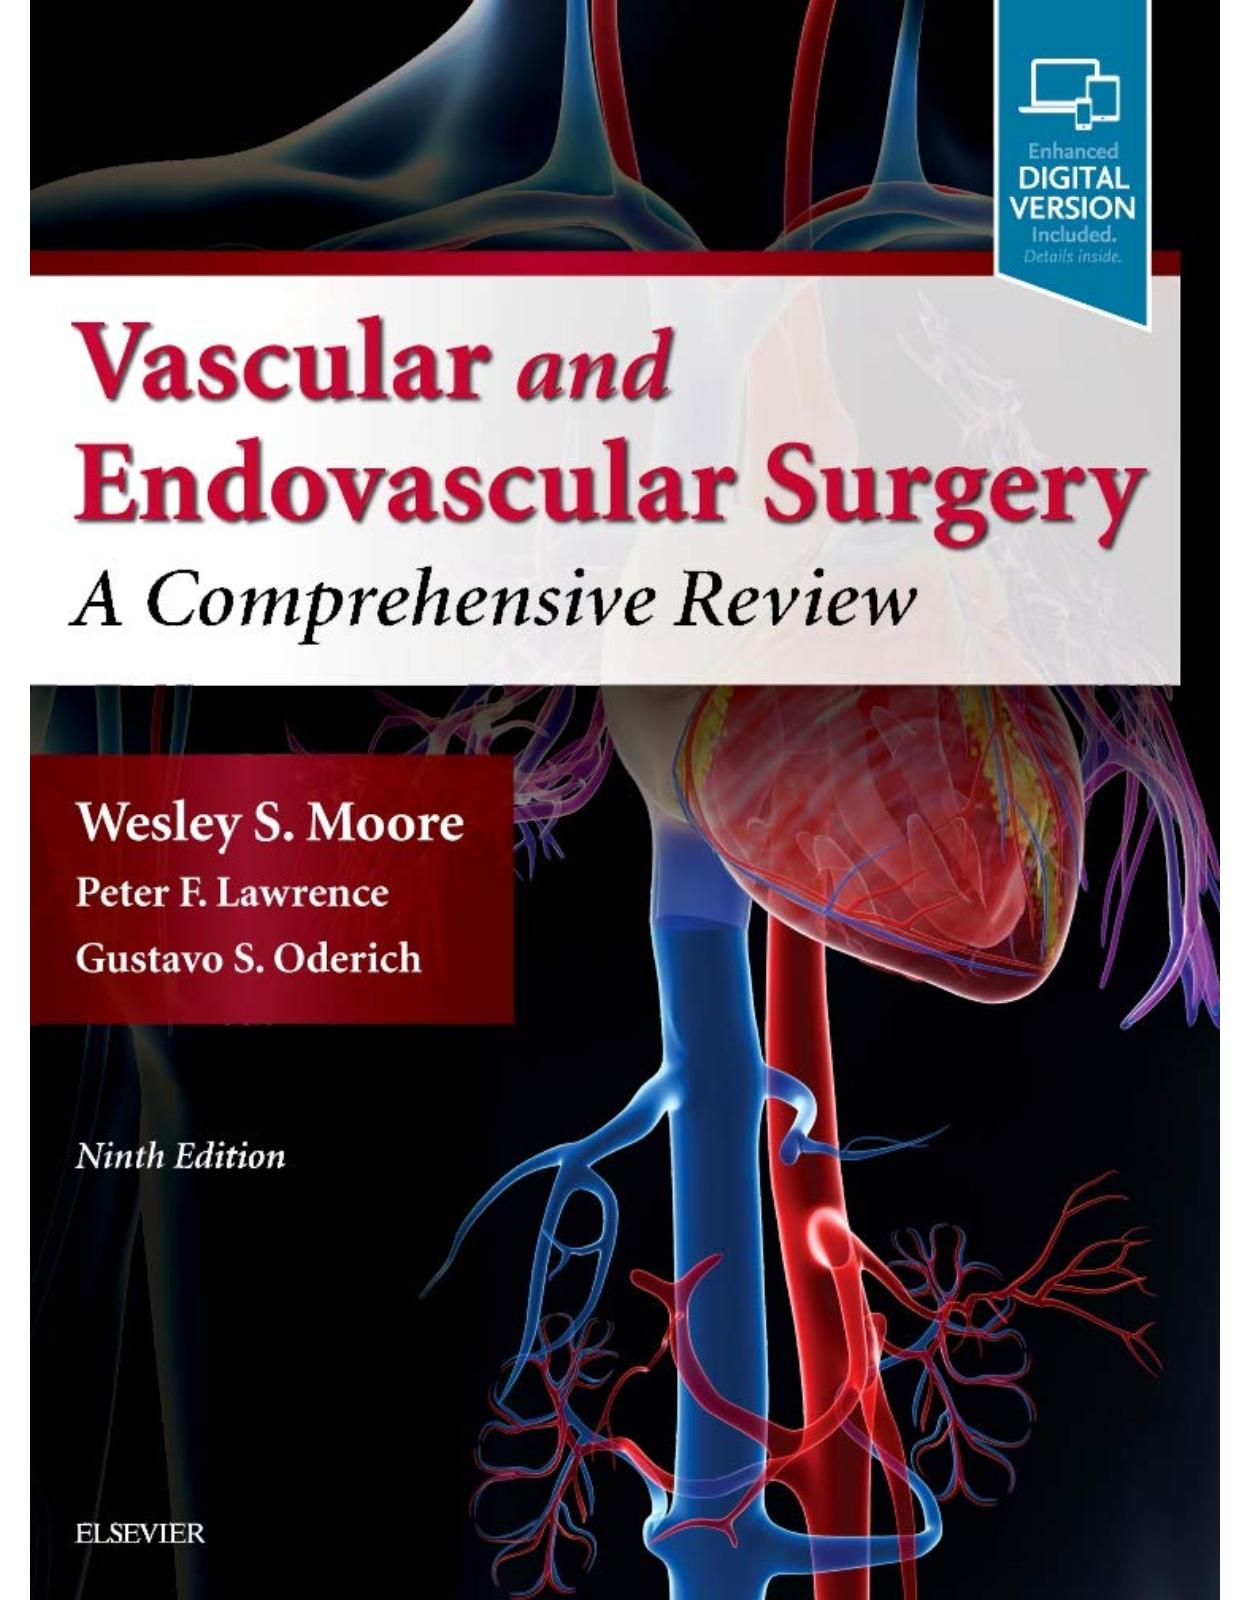 Vascular and Endovascular Surgery, 9th Edition